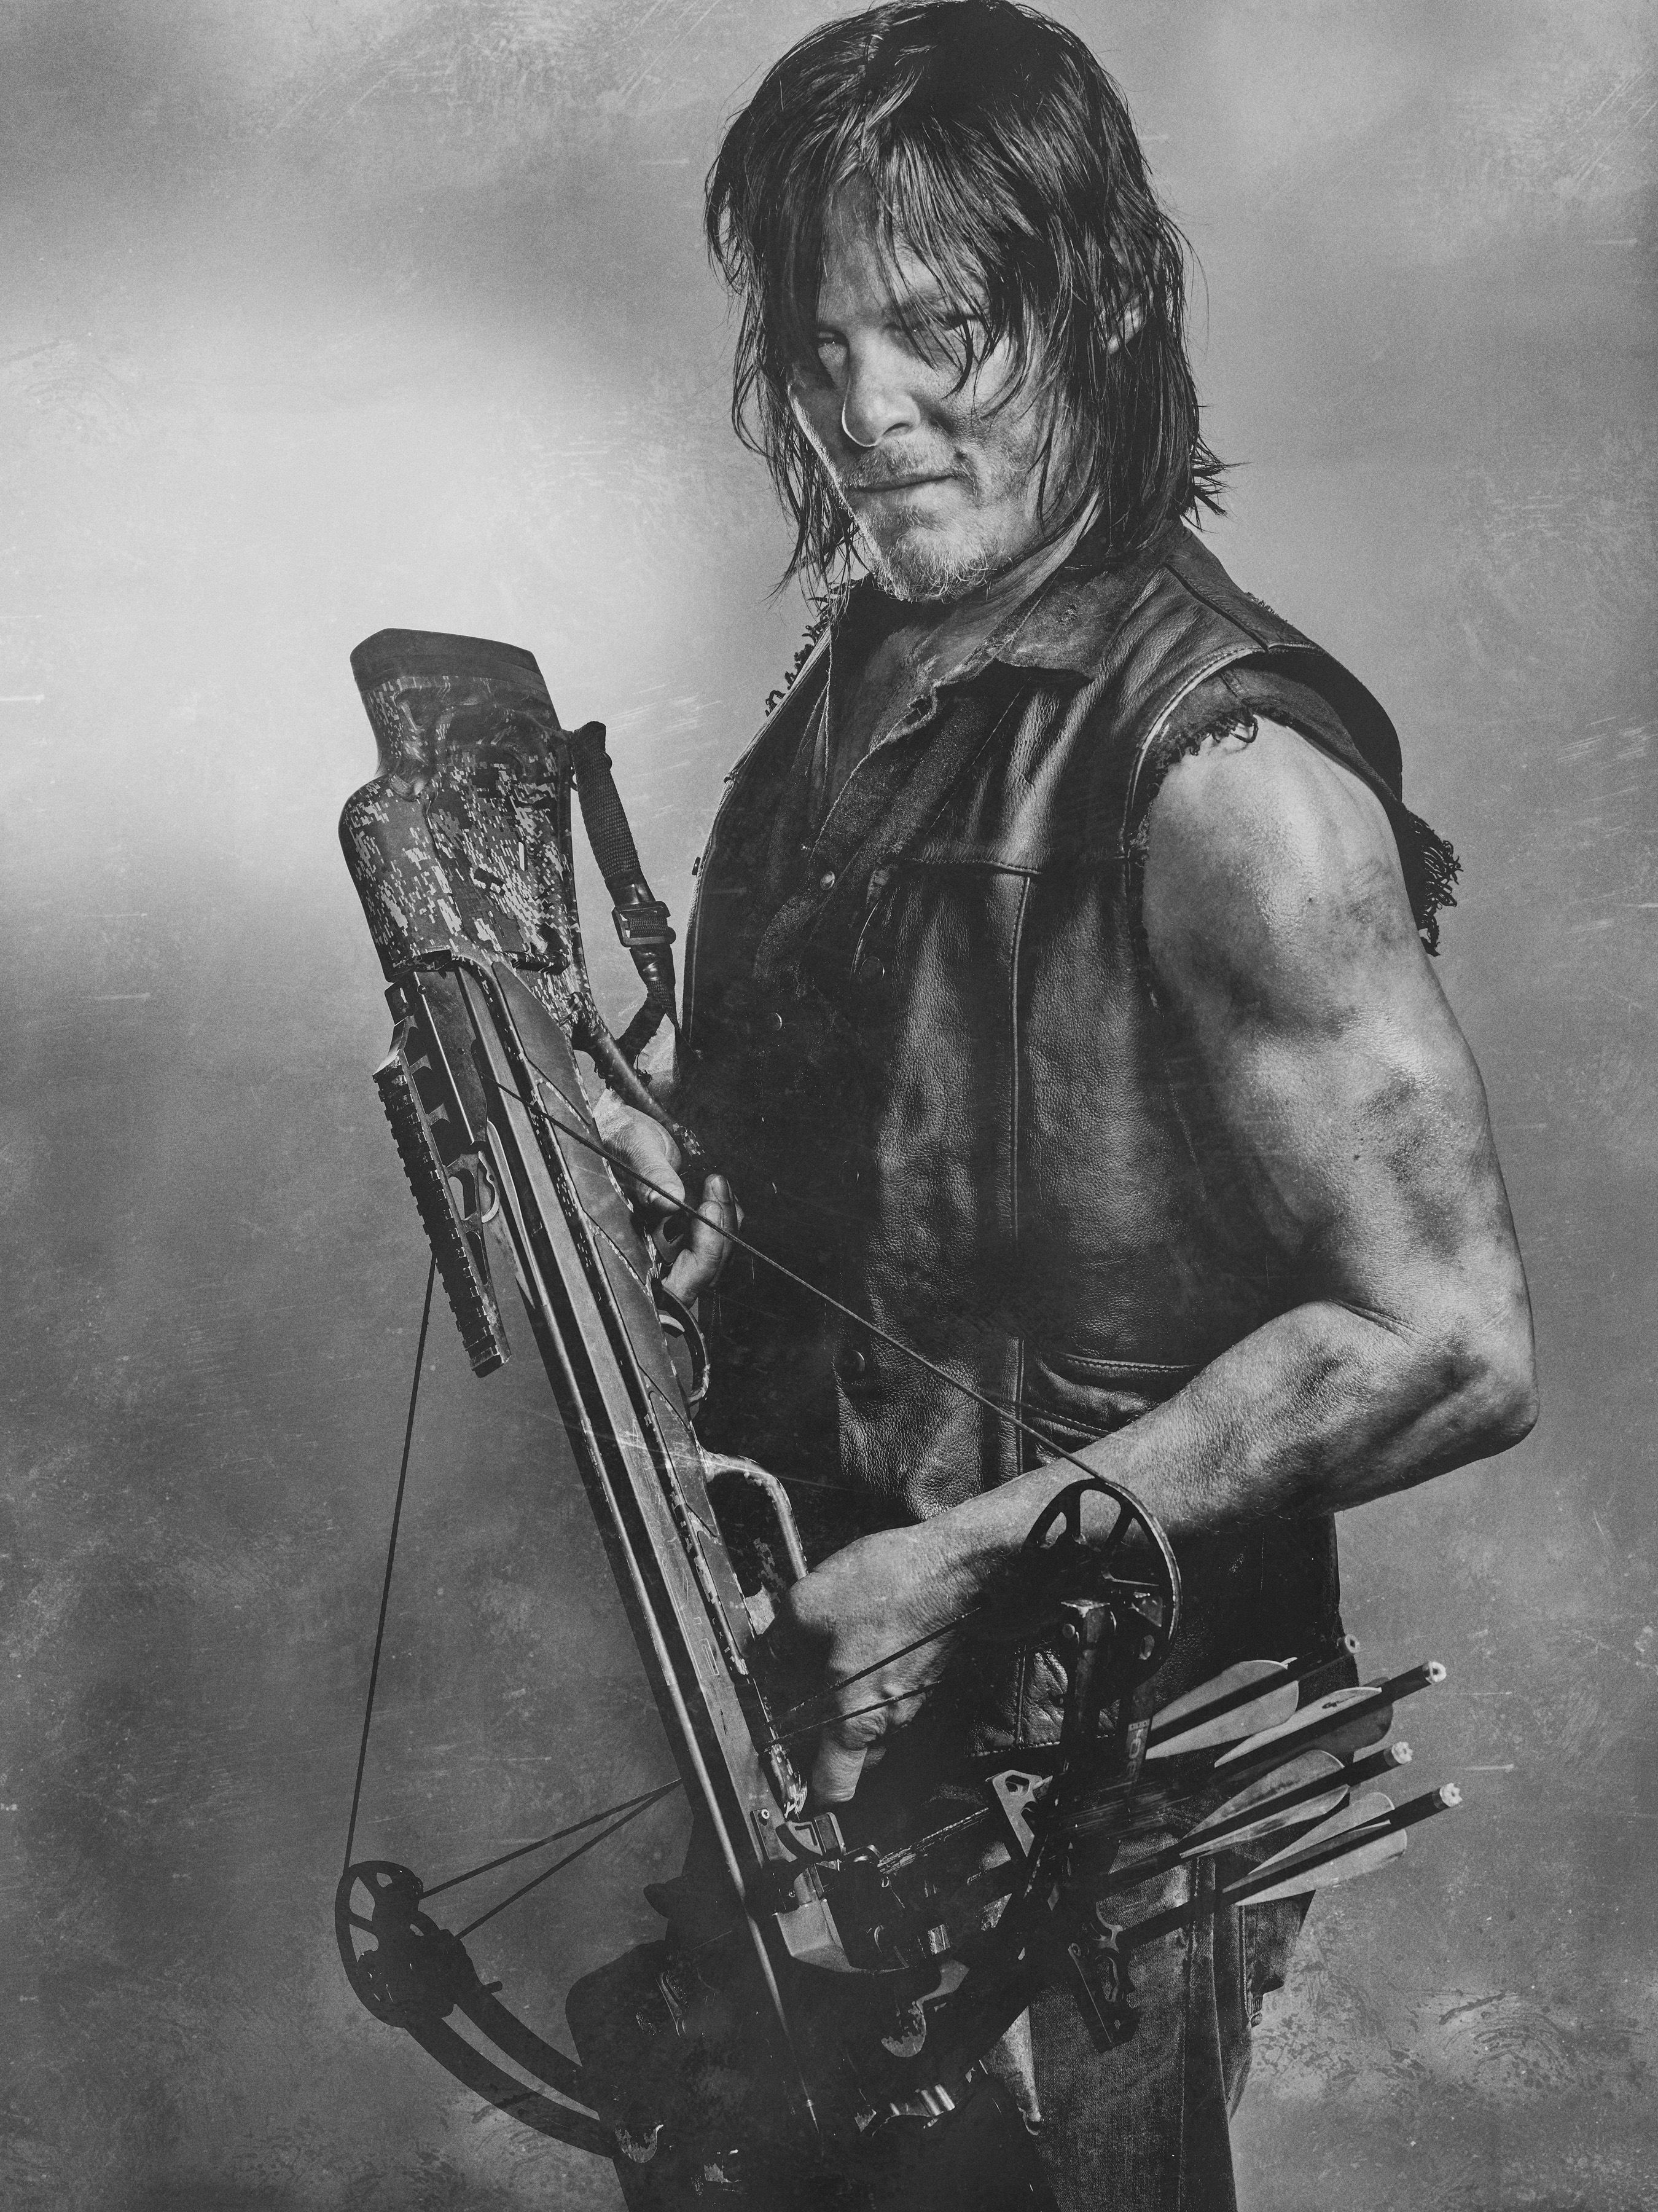 The Walking Dead 7 Reasons Why Daryl Dixon Is the Coolest TV